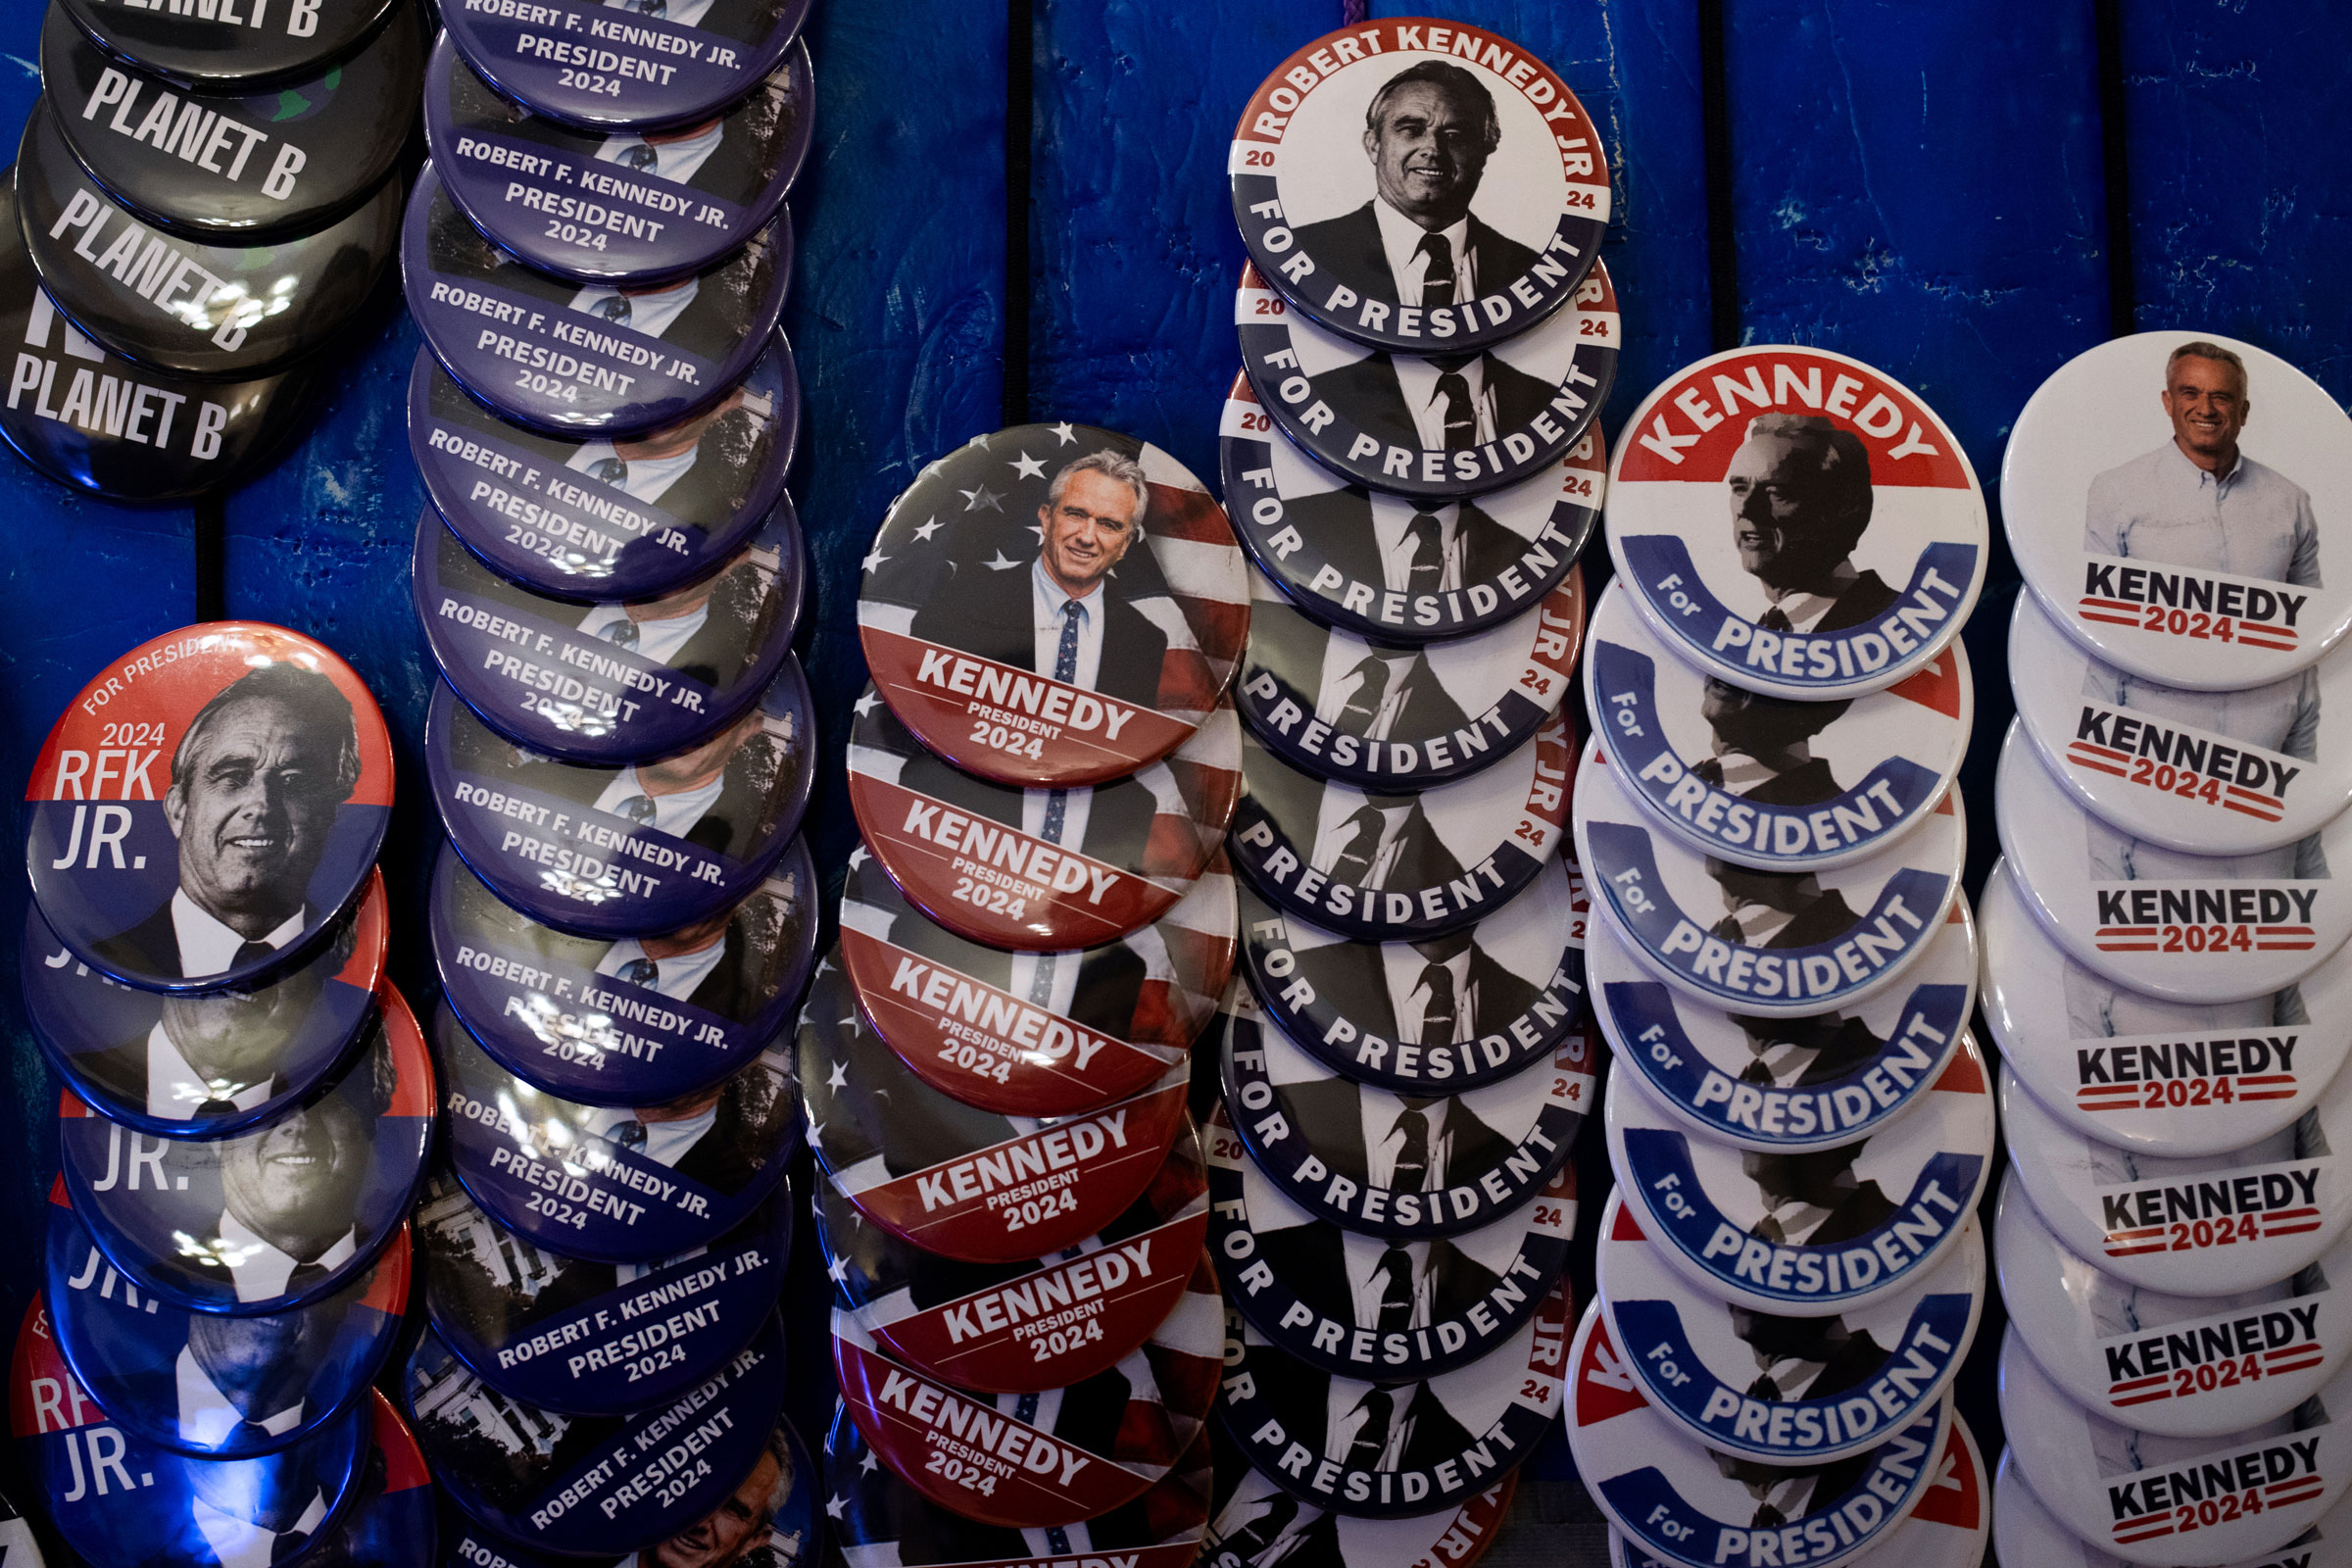 Pins and other merchandise in support of Independent presidential candidate Robert F. Kennedy Jr. on display during a voter rally at St. Cecilia Music Center in Grand Rapids, Mich., on Feb. 10, 2024.